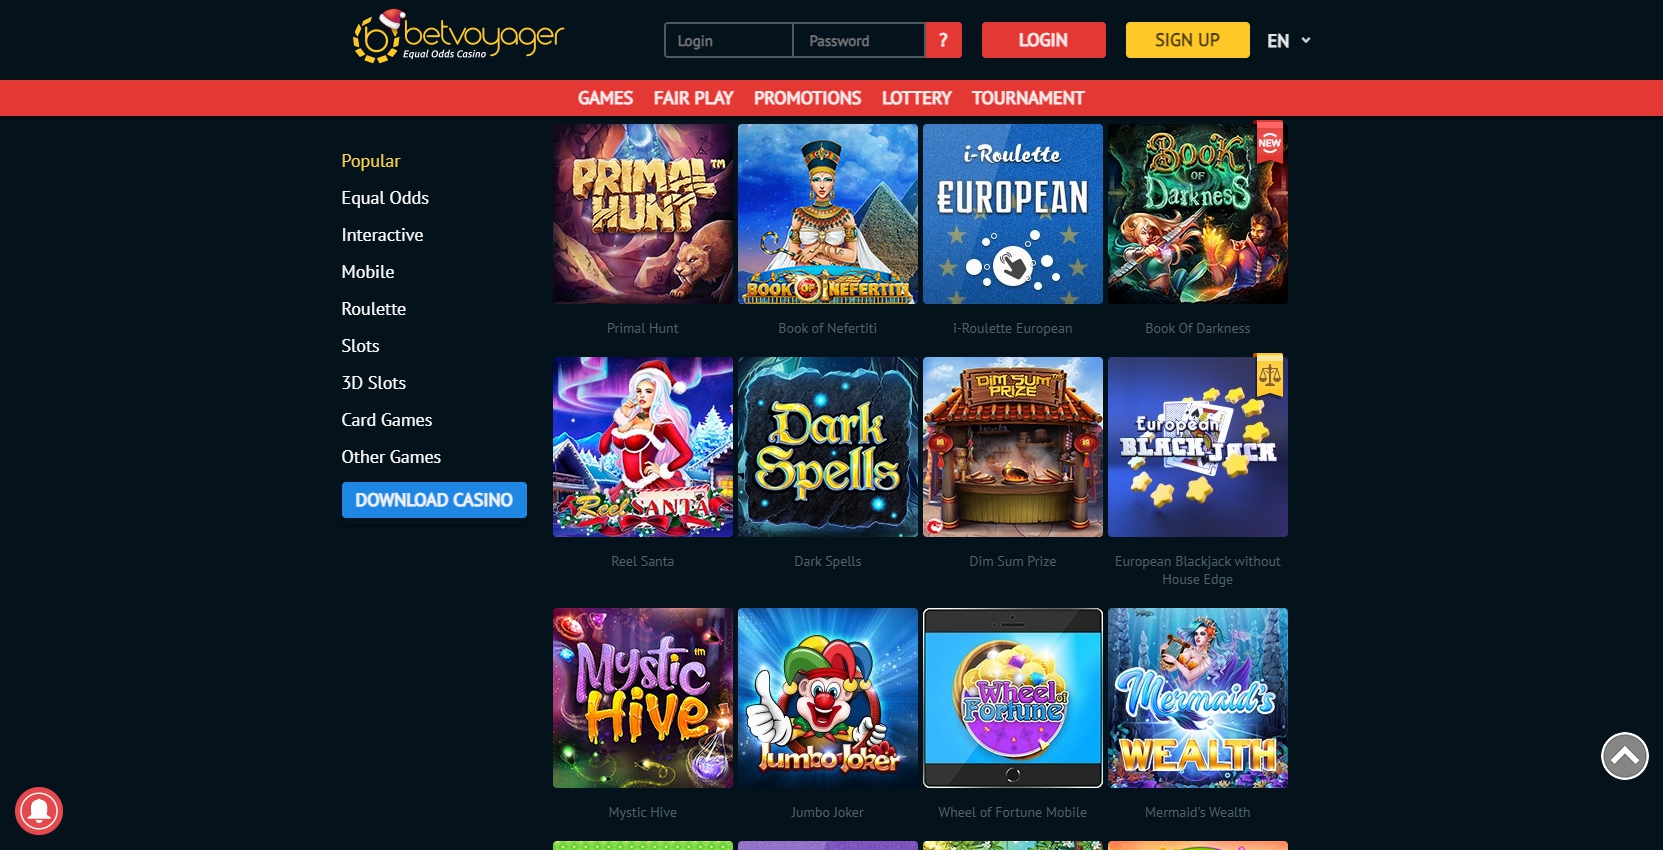 Bet Voyager Casino Games